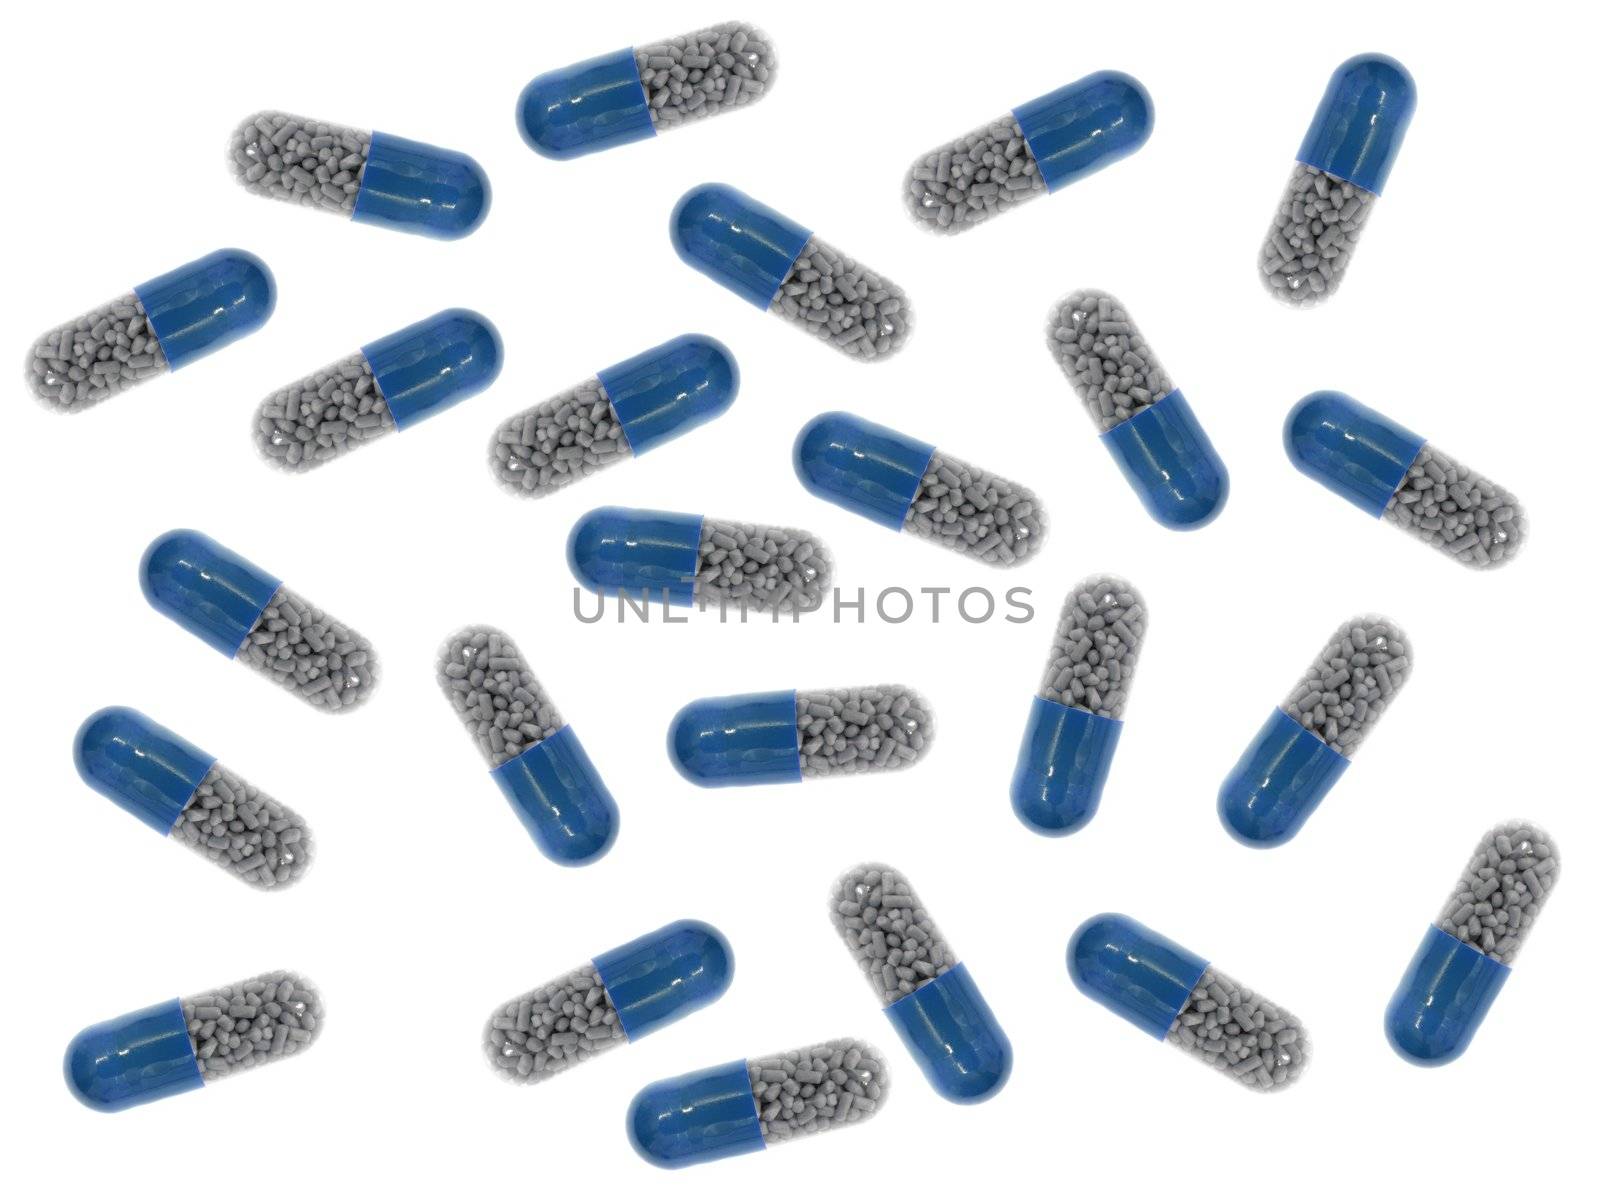 Prescription drugs isolated on a white background